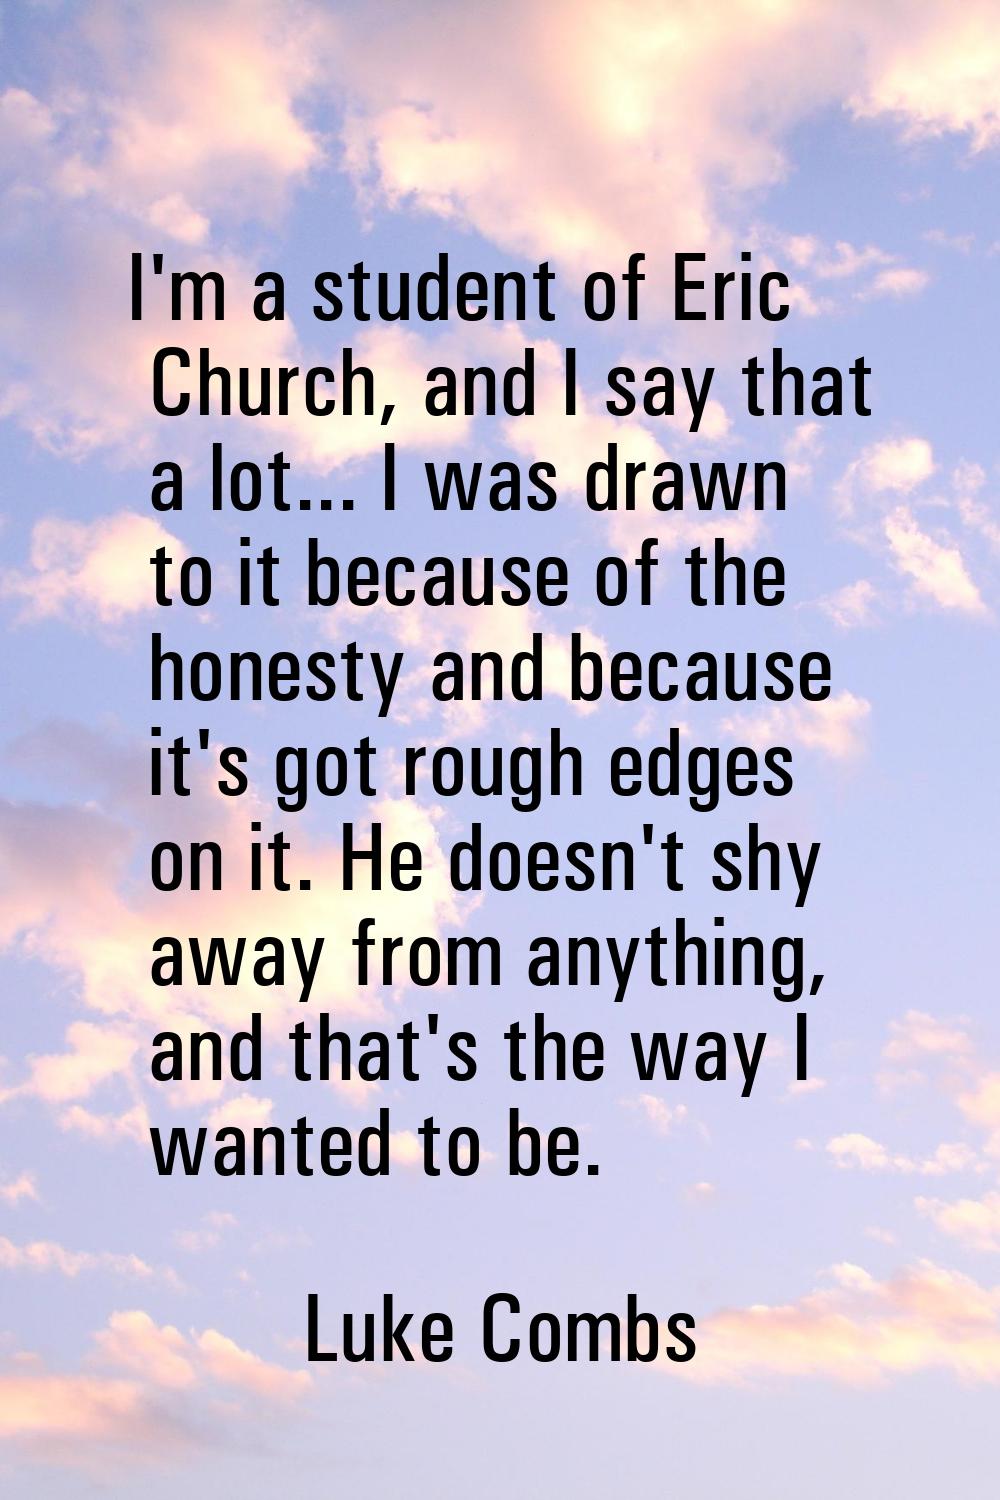 I'm a student of Eric Church, and I say that a lot... I was drawn to it because of the honesty and 